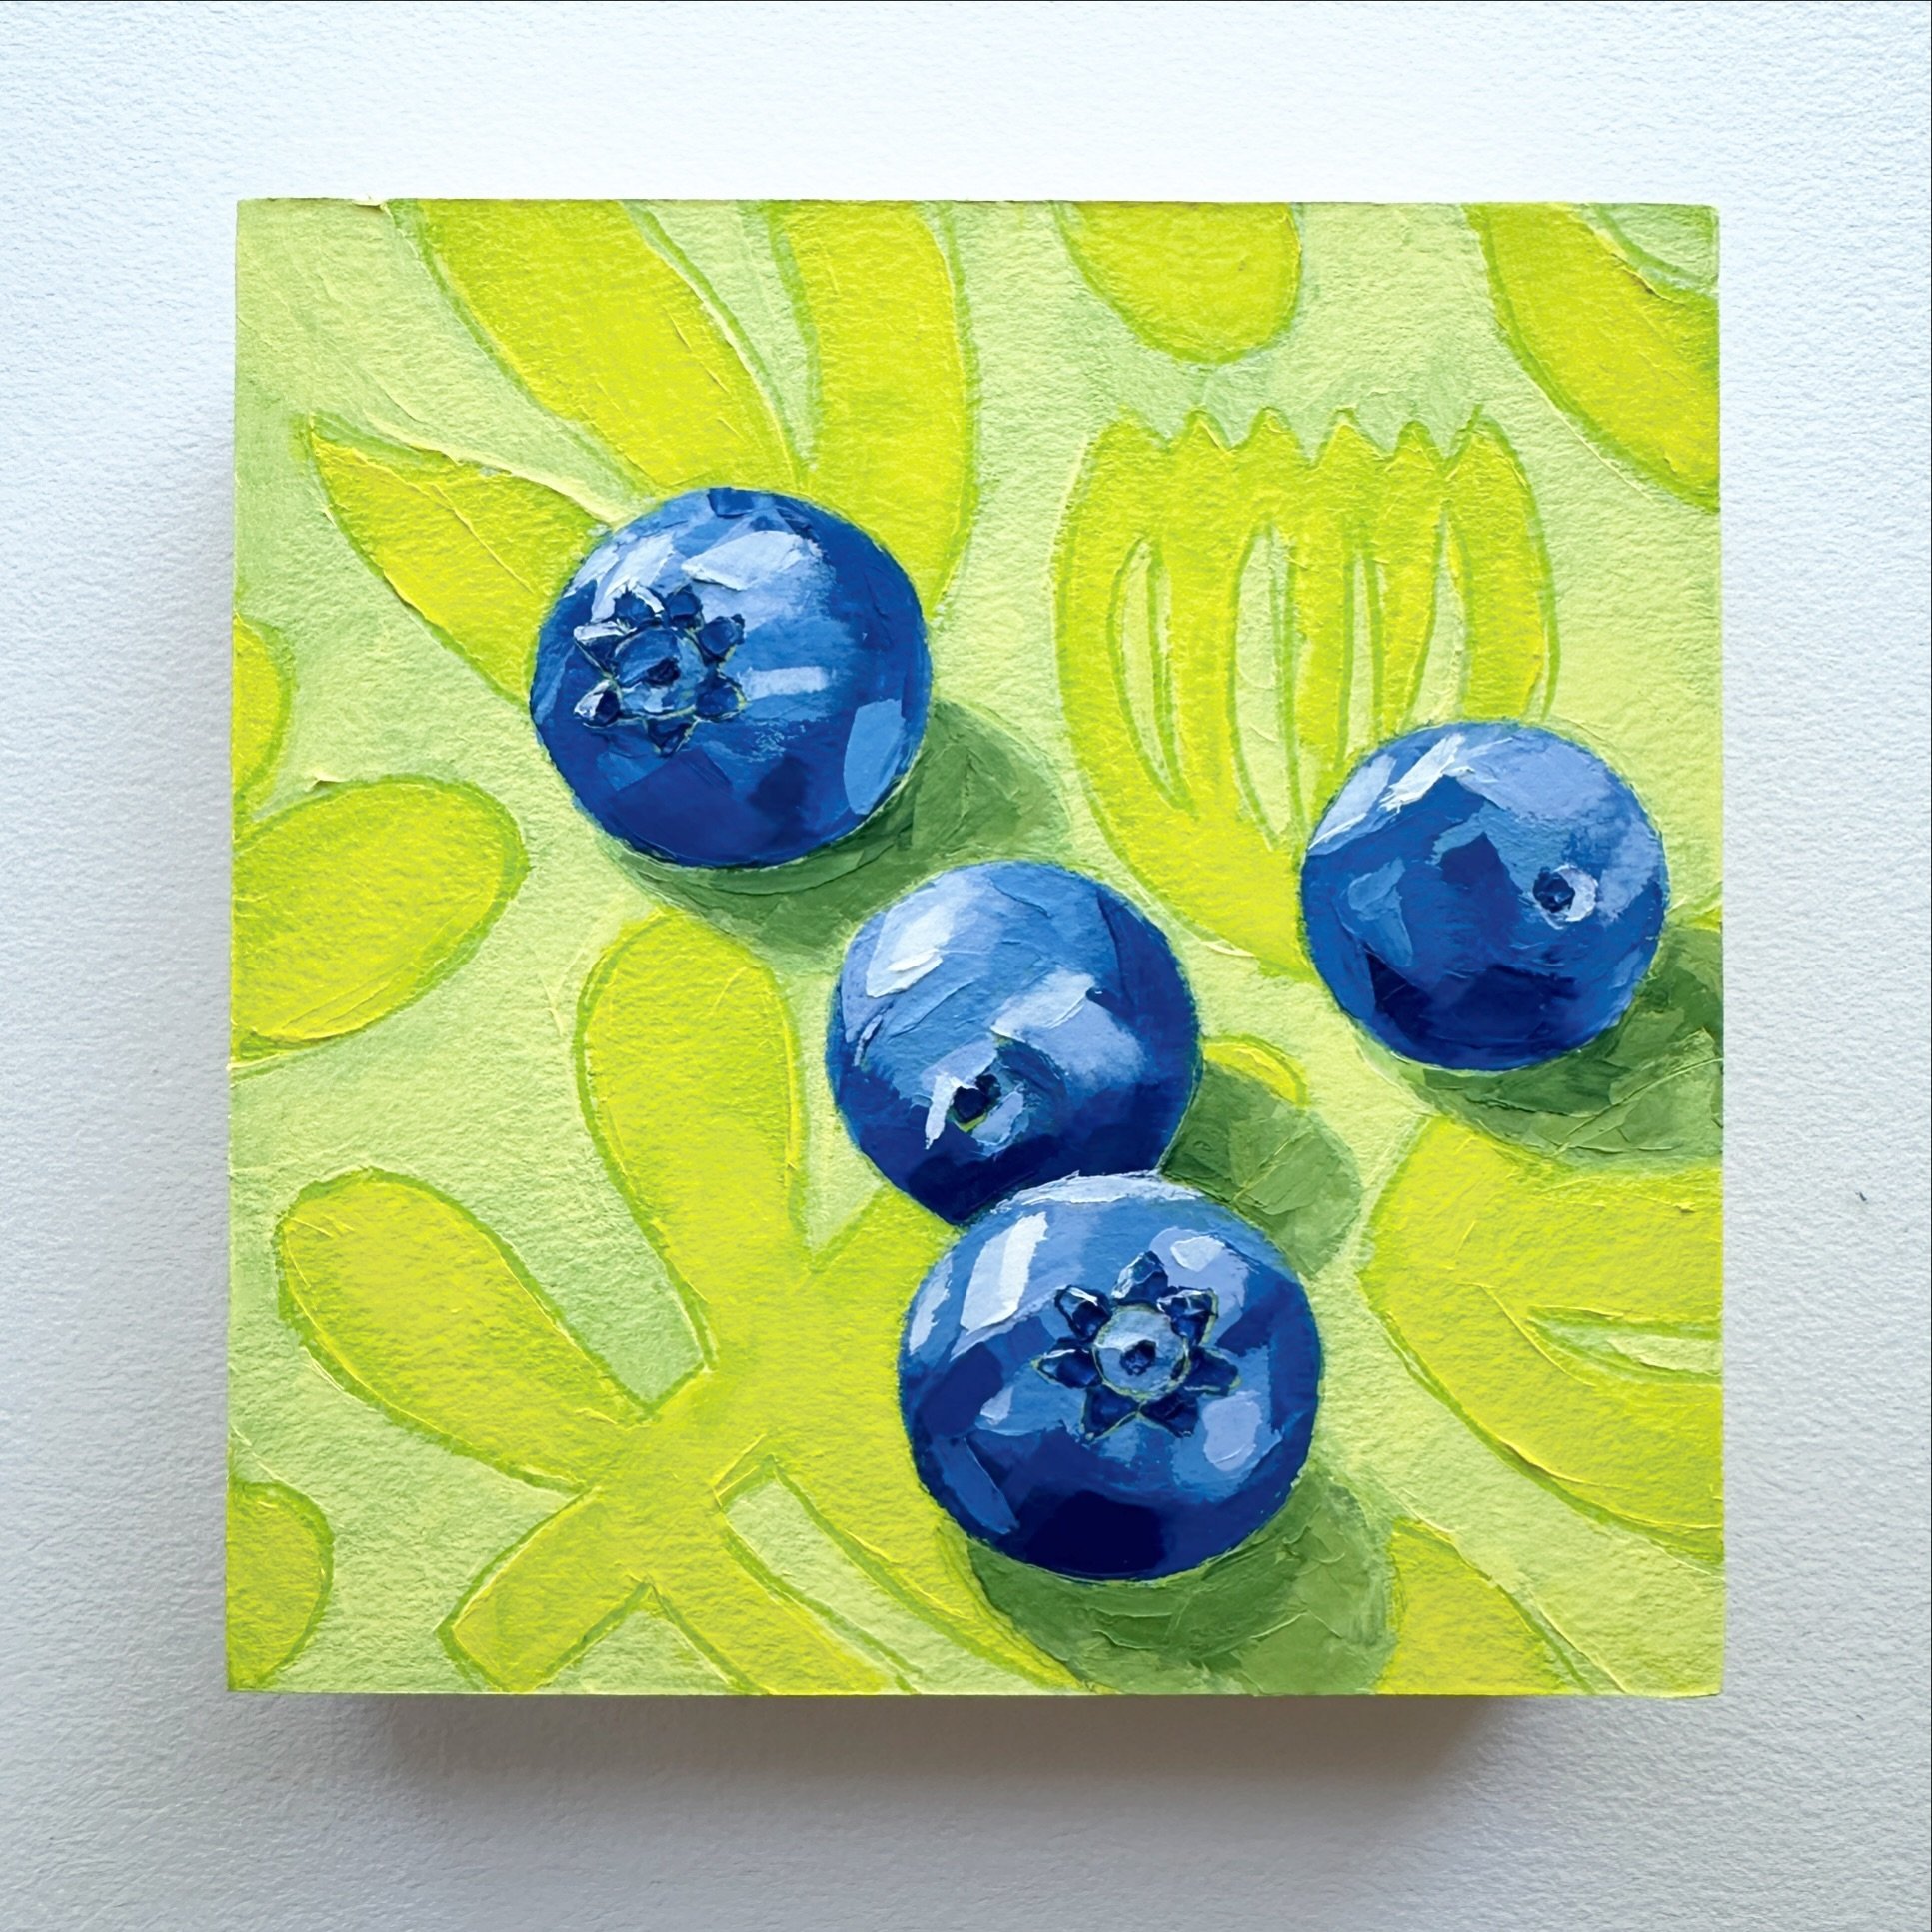 Day 54, The 100 Day Project 2024 @dothe100dayproject

Blueberries! Seriously, could these be any more cheery and vibrant? These fruits would look so cute in a kitchen or breakfast nook! 

For days 51-60 of my 100 Day Project, I&rsquo;ll be painting f